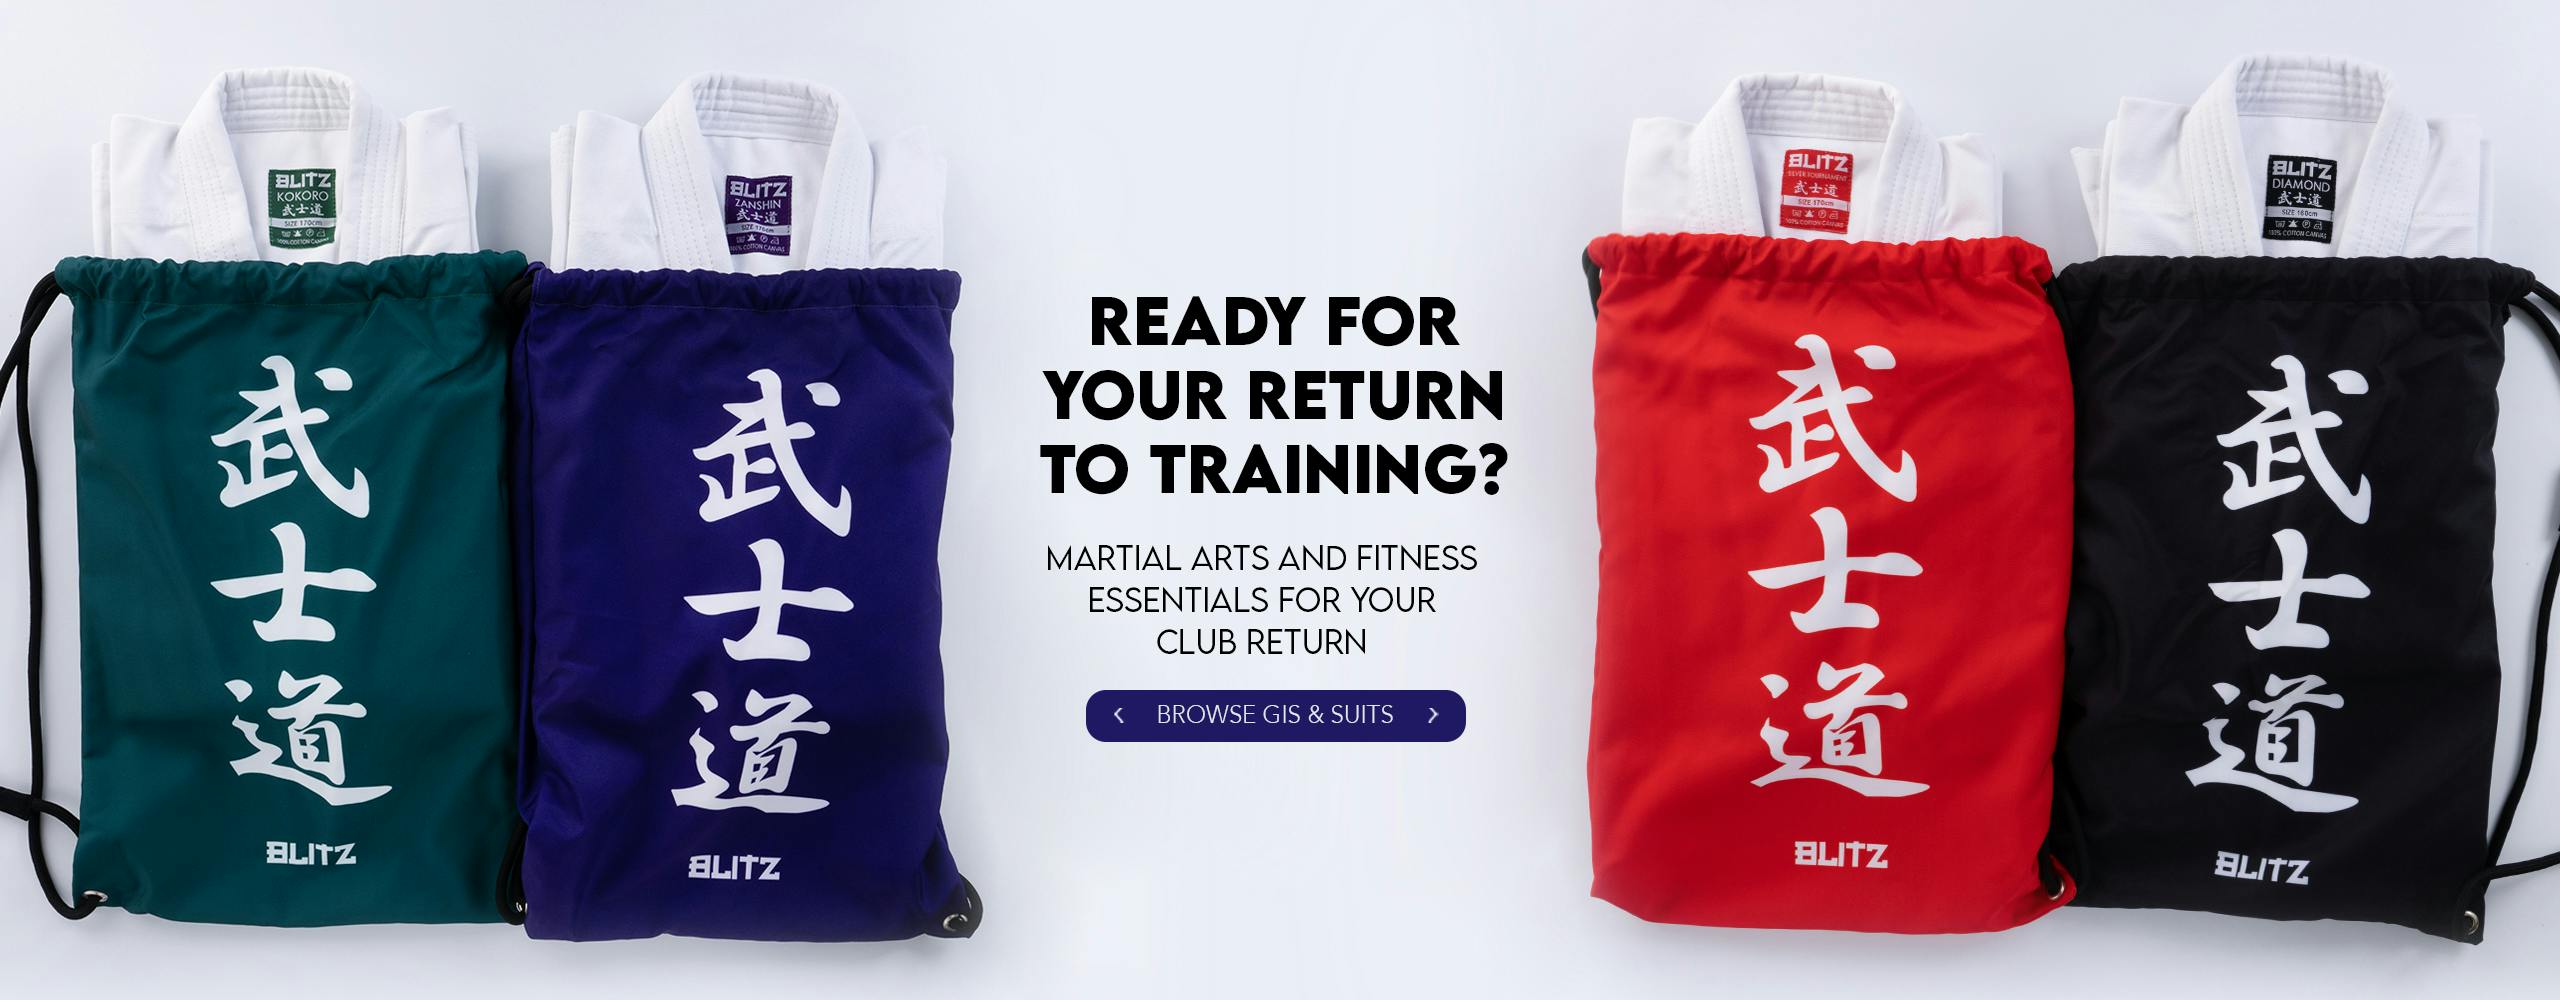 Are you ready for your return to training with our Martial Arts and fitness essentials?